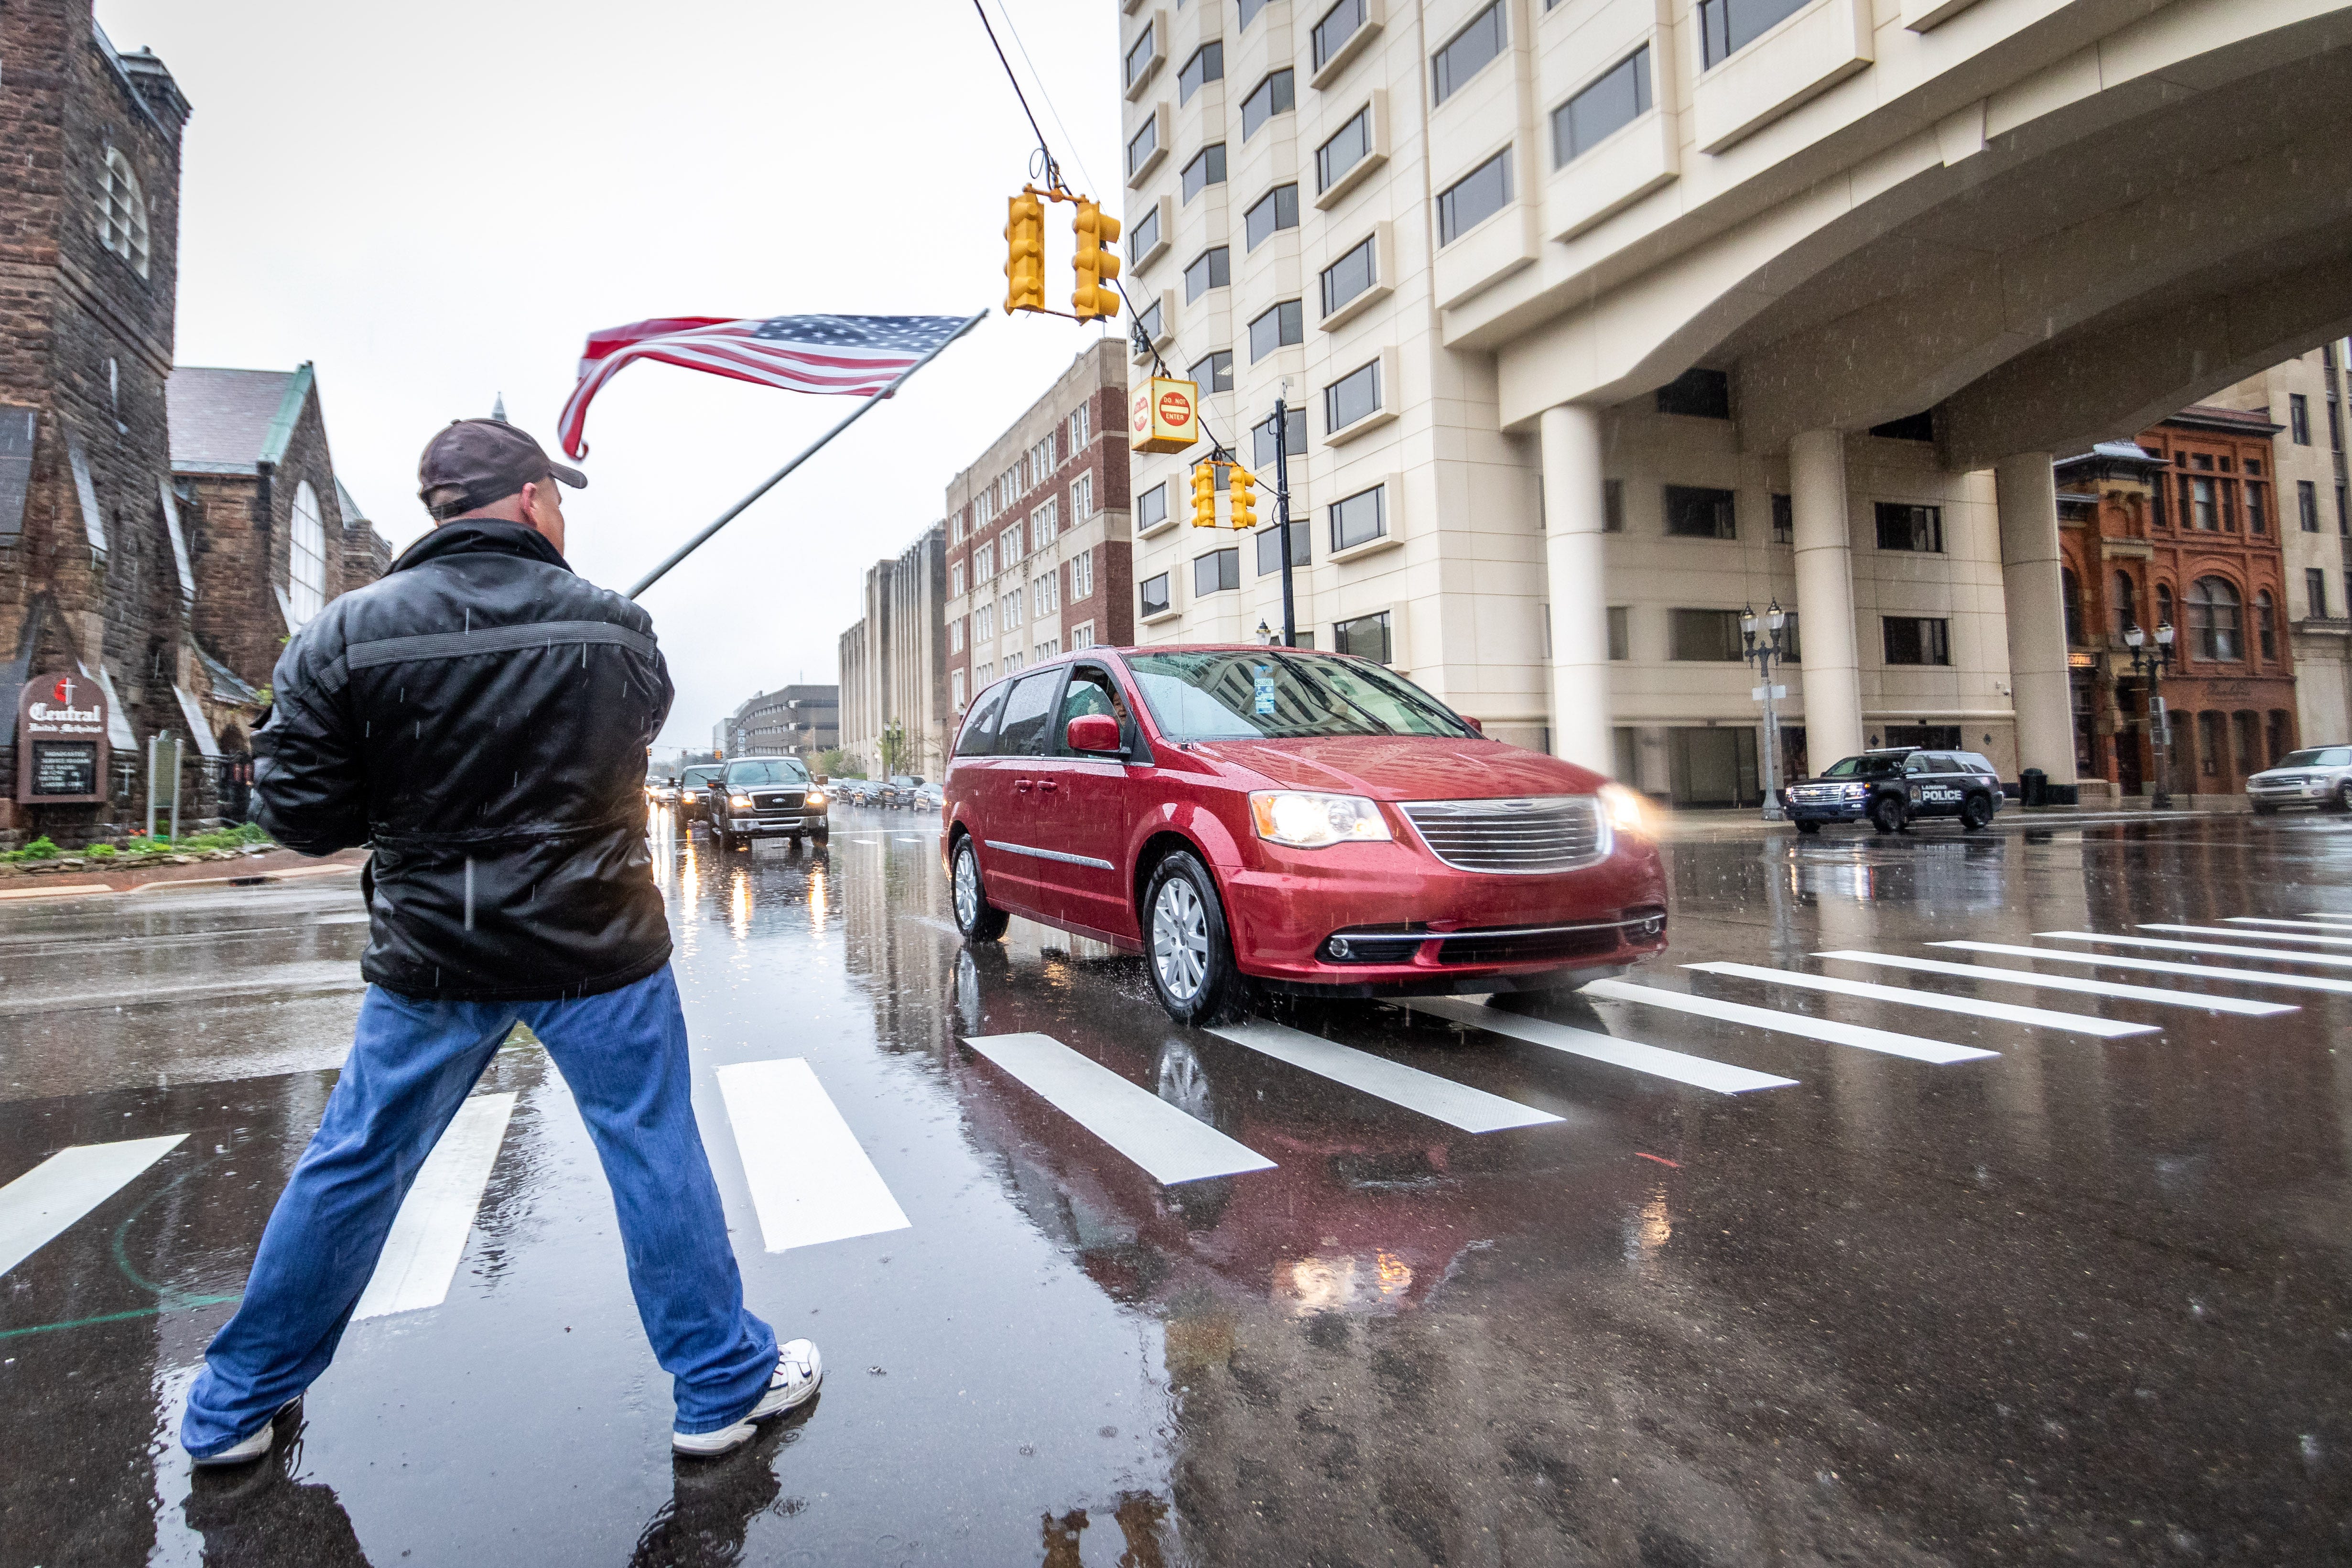 Clay Coey of Lansing waves a flag on the street in front of the Capitol as cars pass by and honk in support.